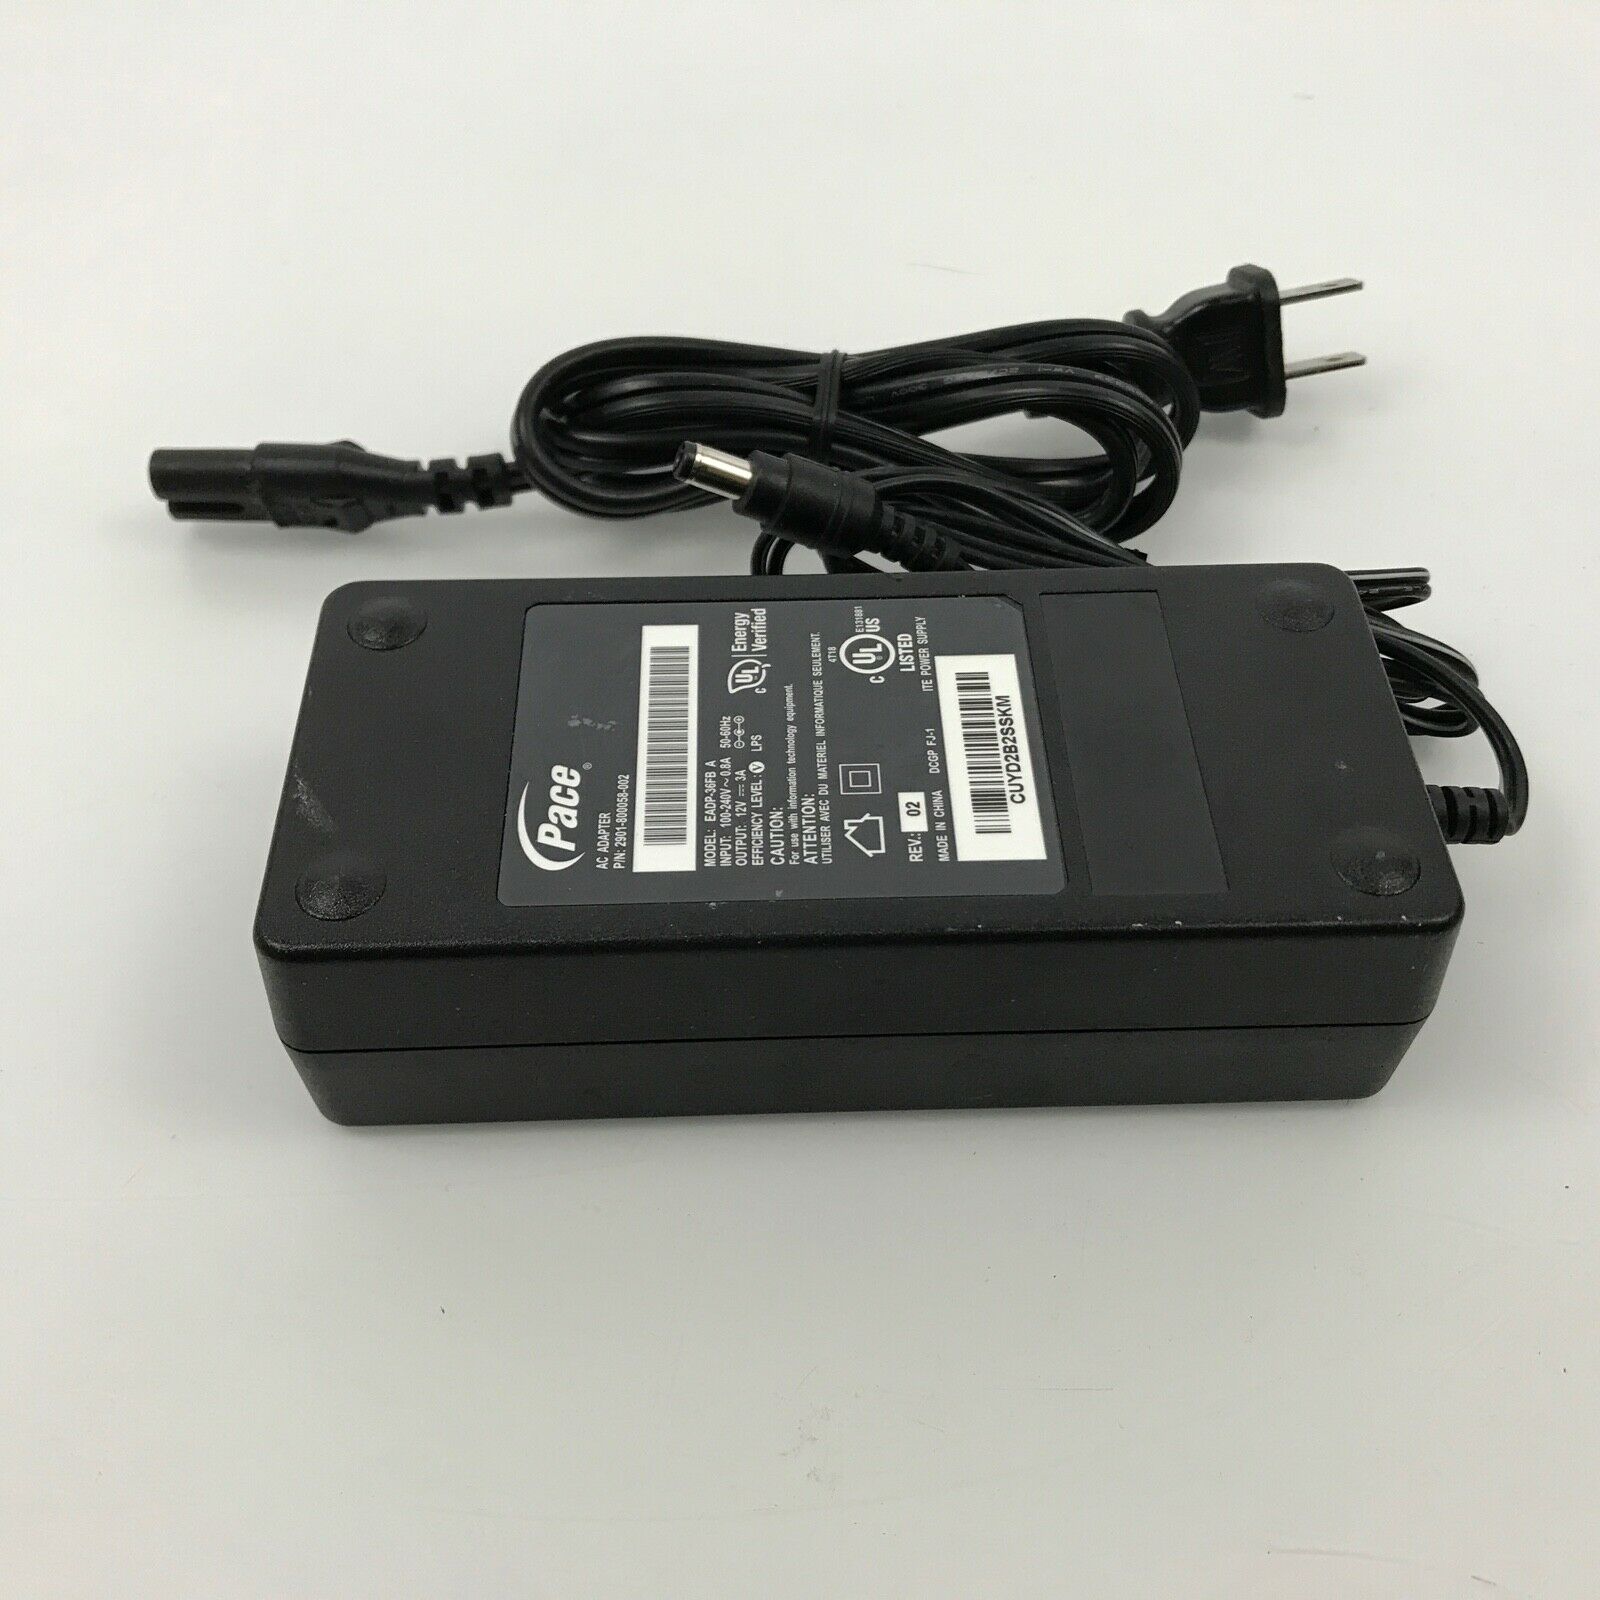 *Brand NEW* 12V 3A AC Adapter Pace 2901-800058-002 EADP-36FB POWER SUPPLY